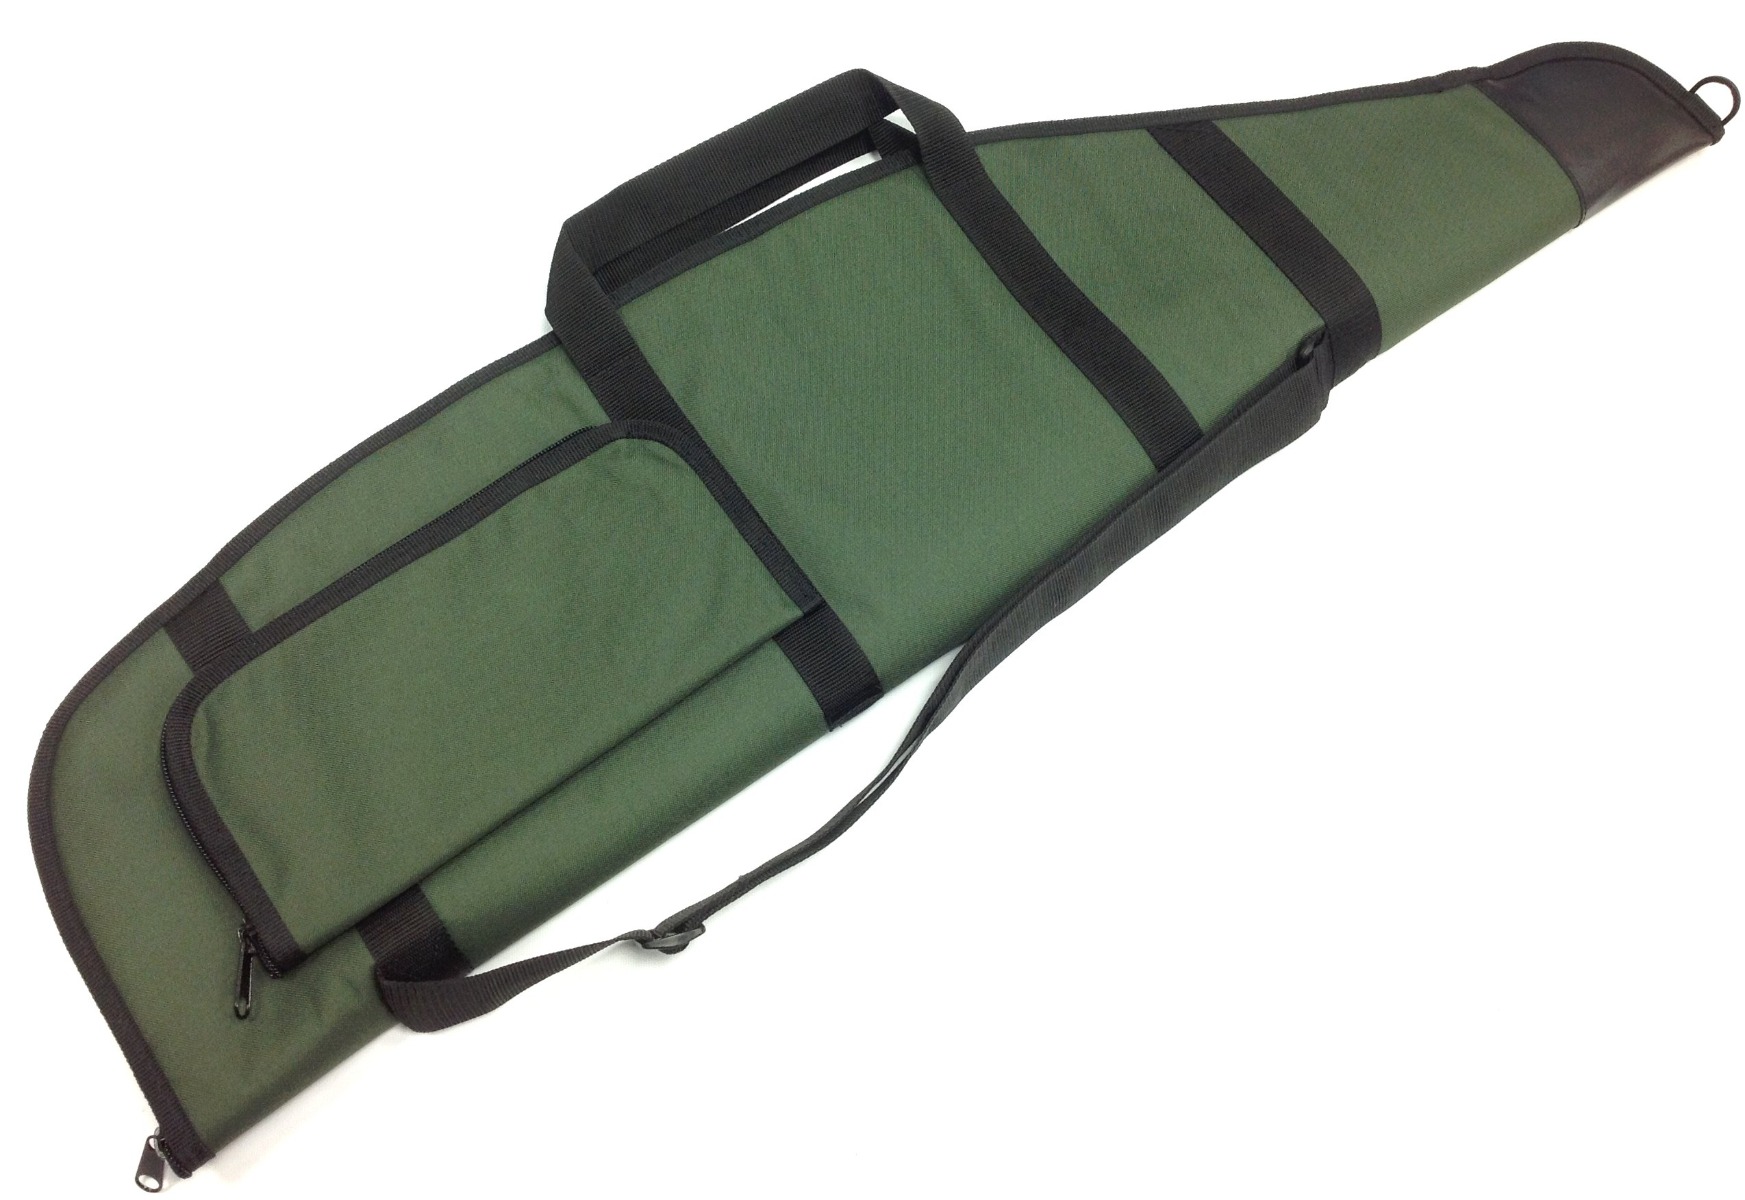 Croots 44" Extra Wide Padded Rifle Bag